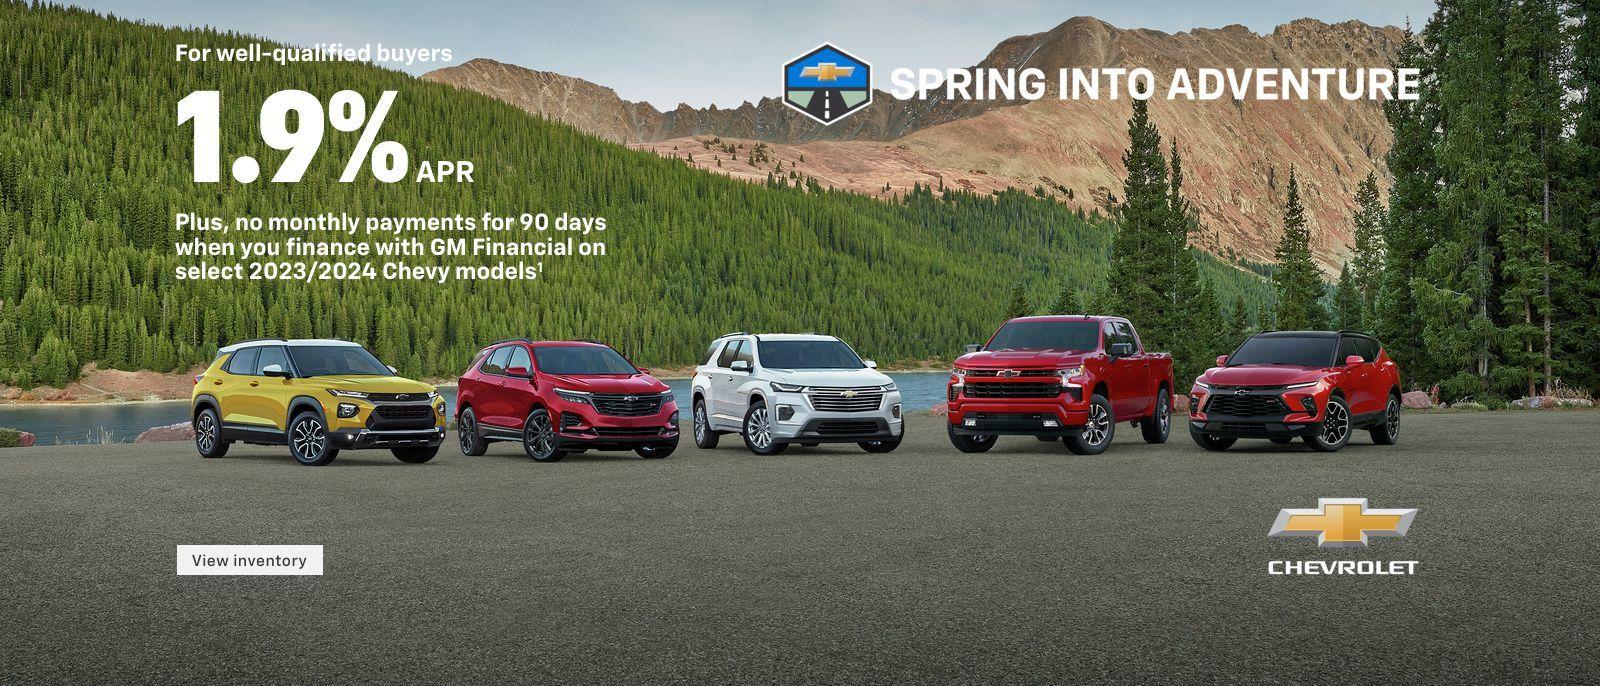 For well-qualified buyers 1.9% APR + No monthly payments for 90 DAYS when you finance with GM Financial on select 2023/2024 Chevy models.